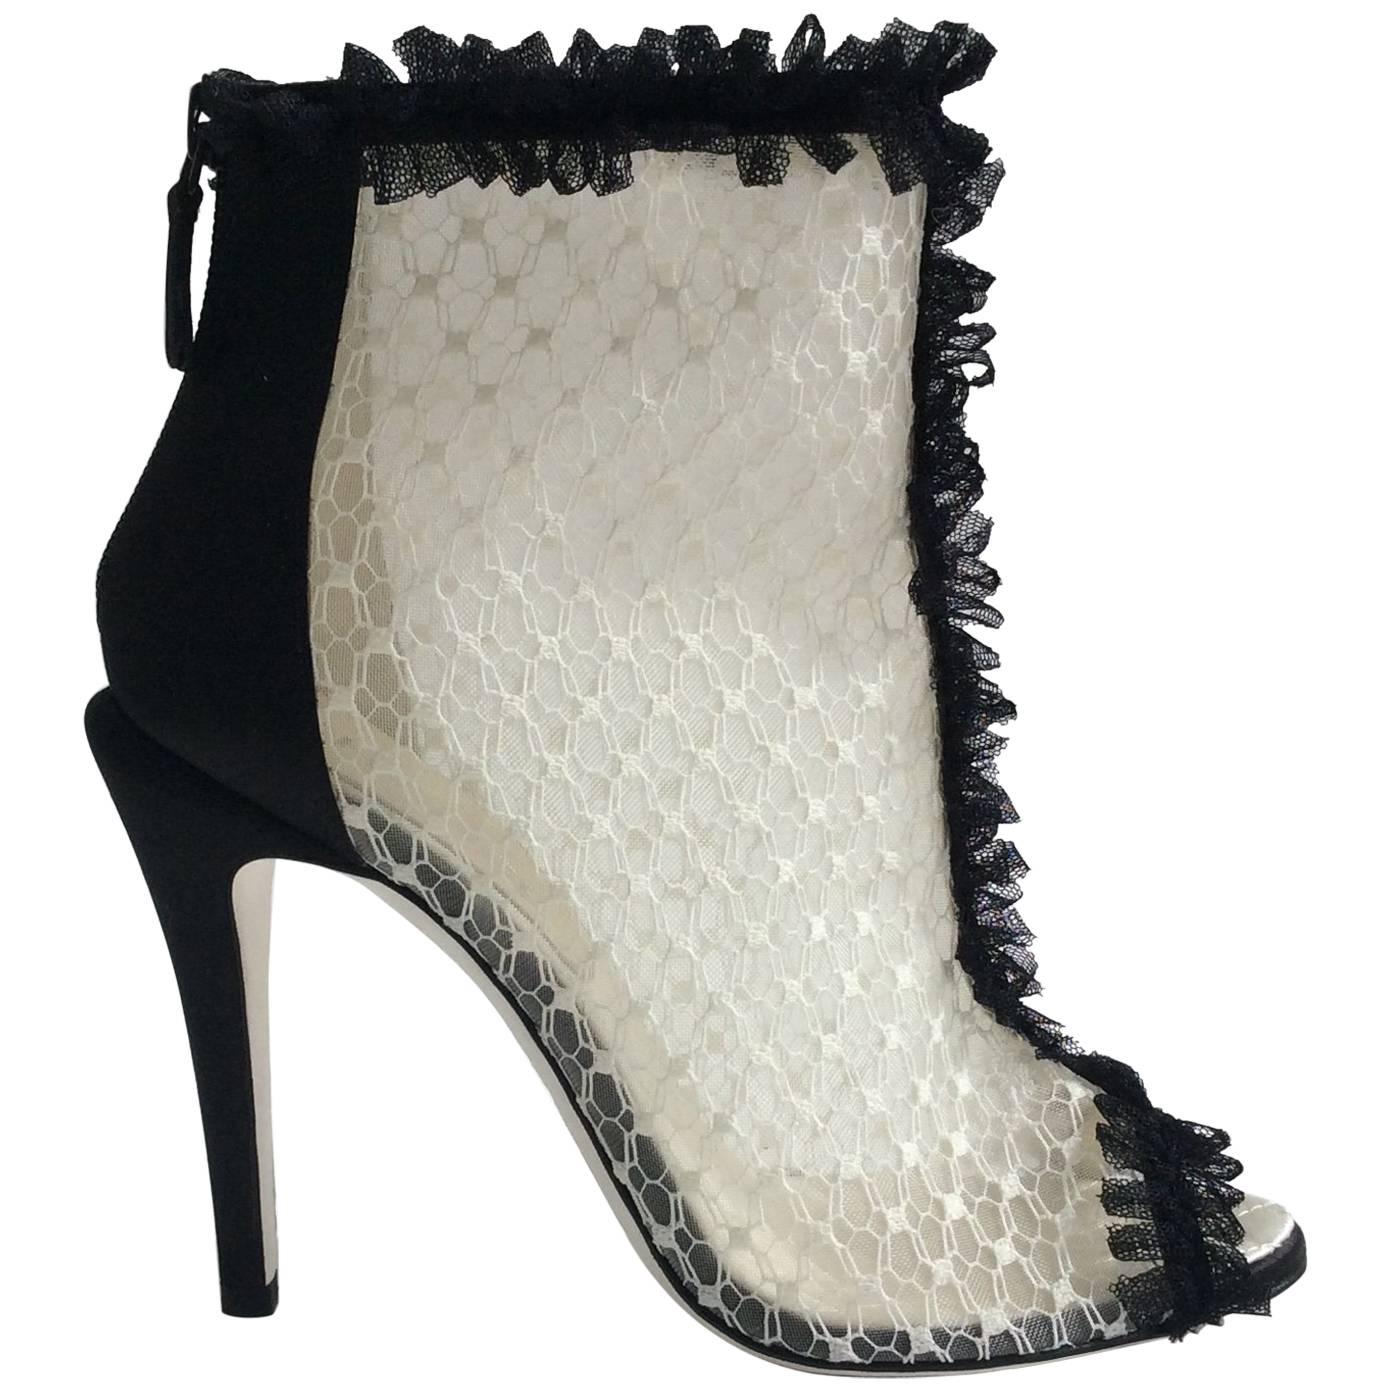 Chanel Black and White Open Toe Lace Booties Sz 38